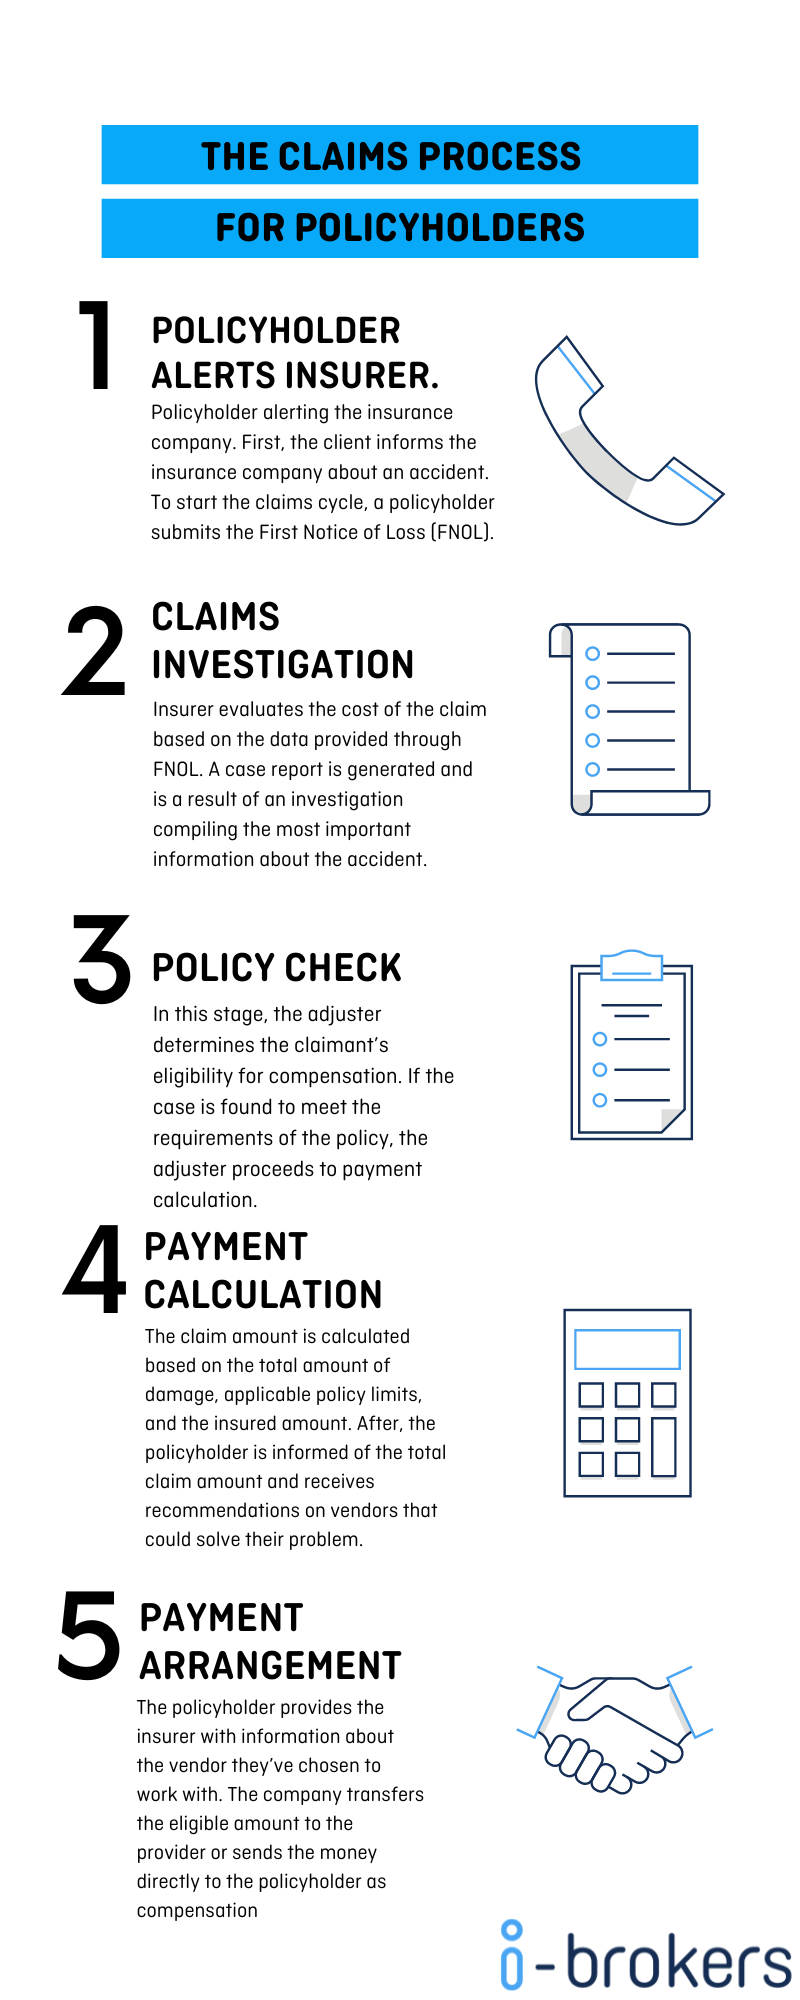 The Claims Process for Policyholders